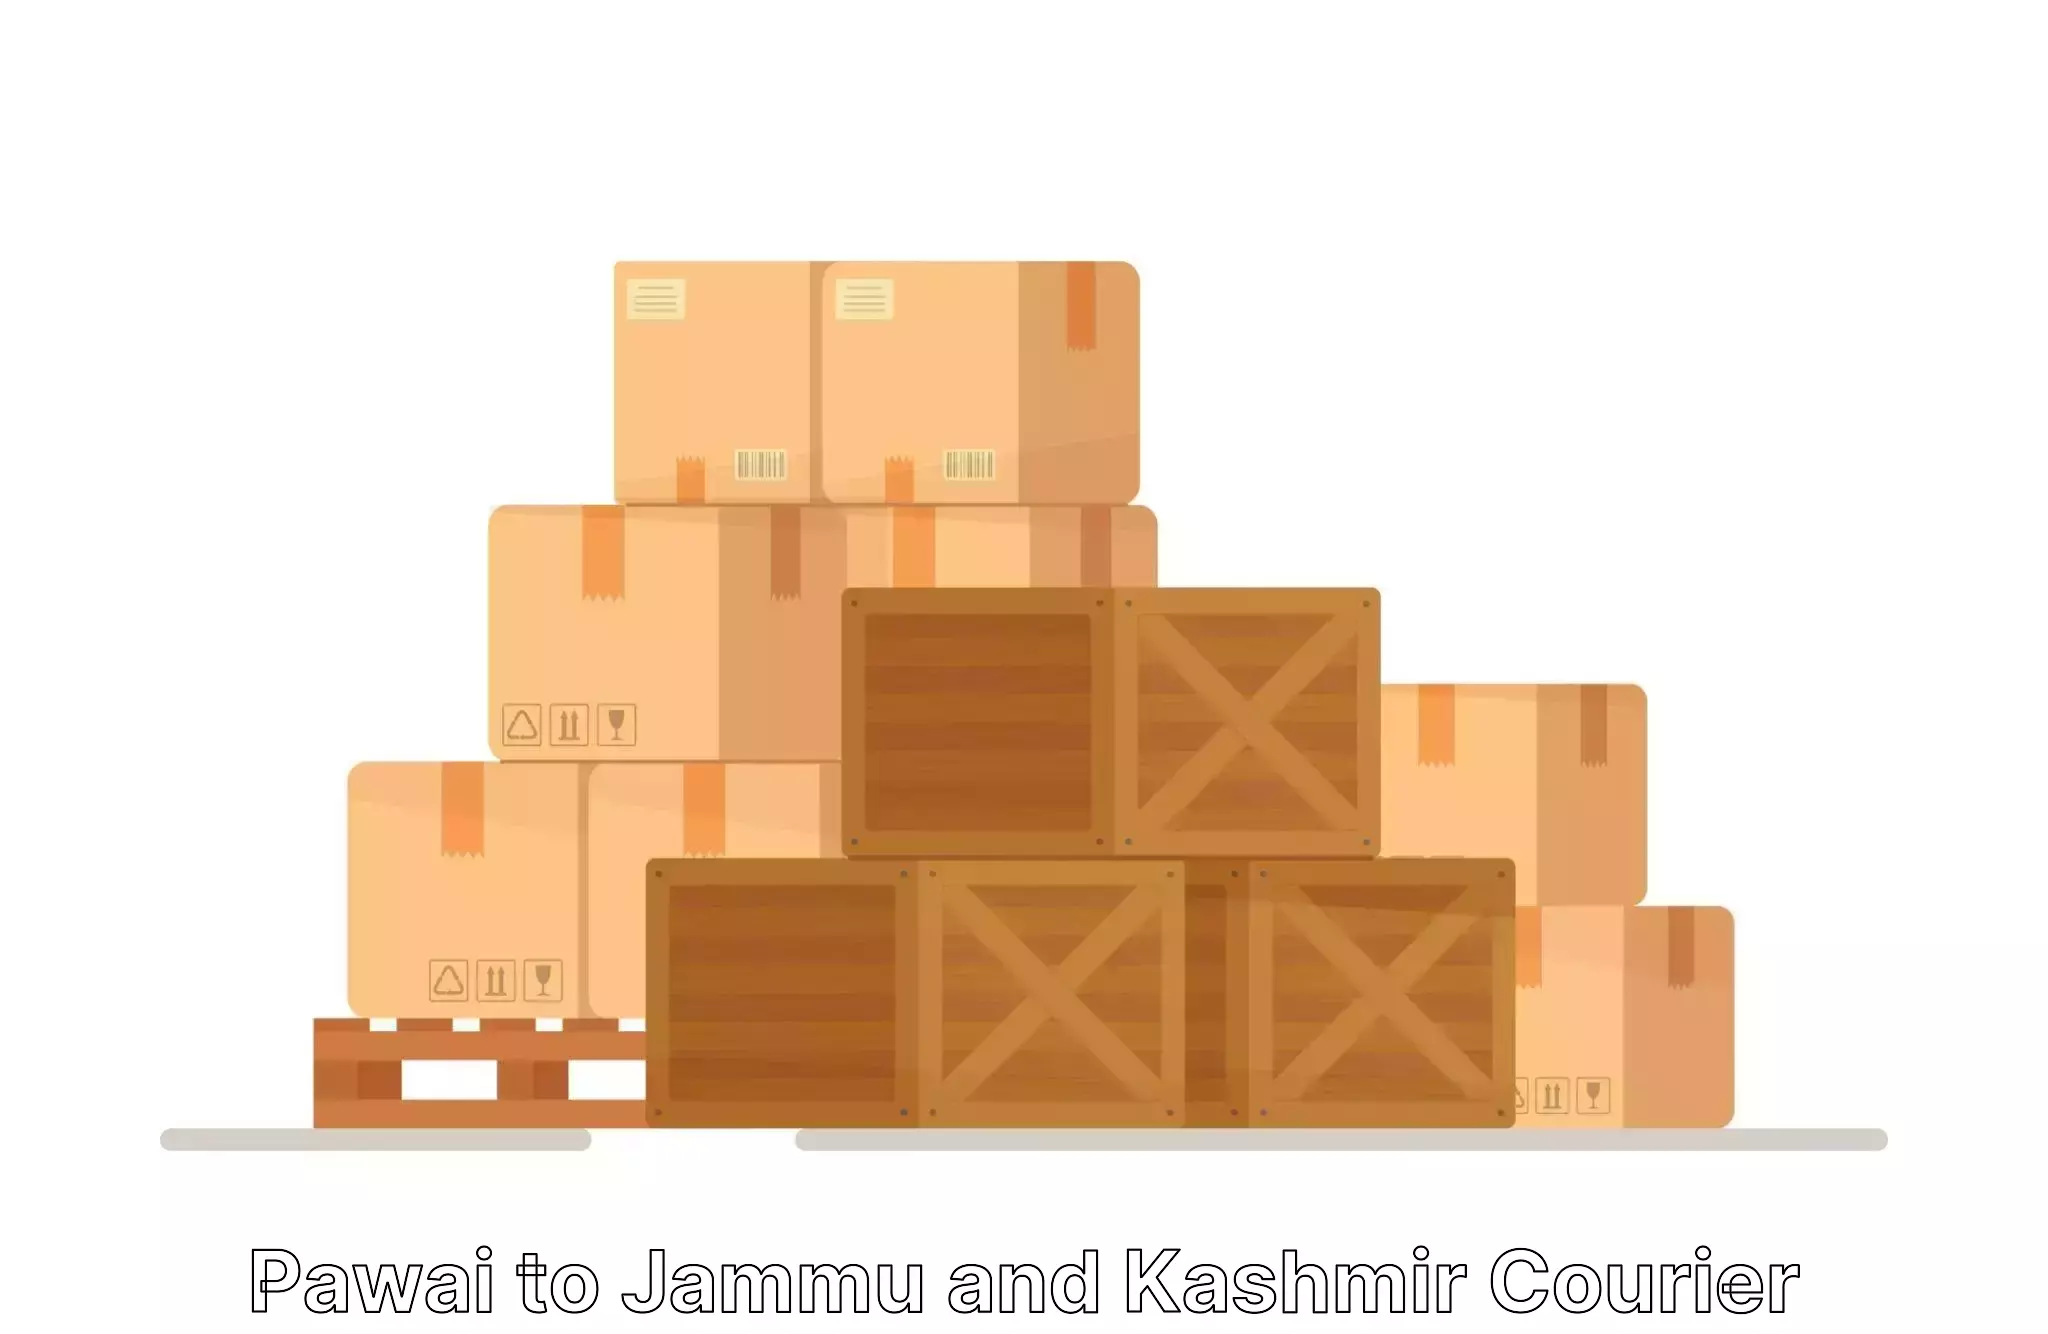 Furniture delivery service Pawai to Jammu and Kashmir